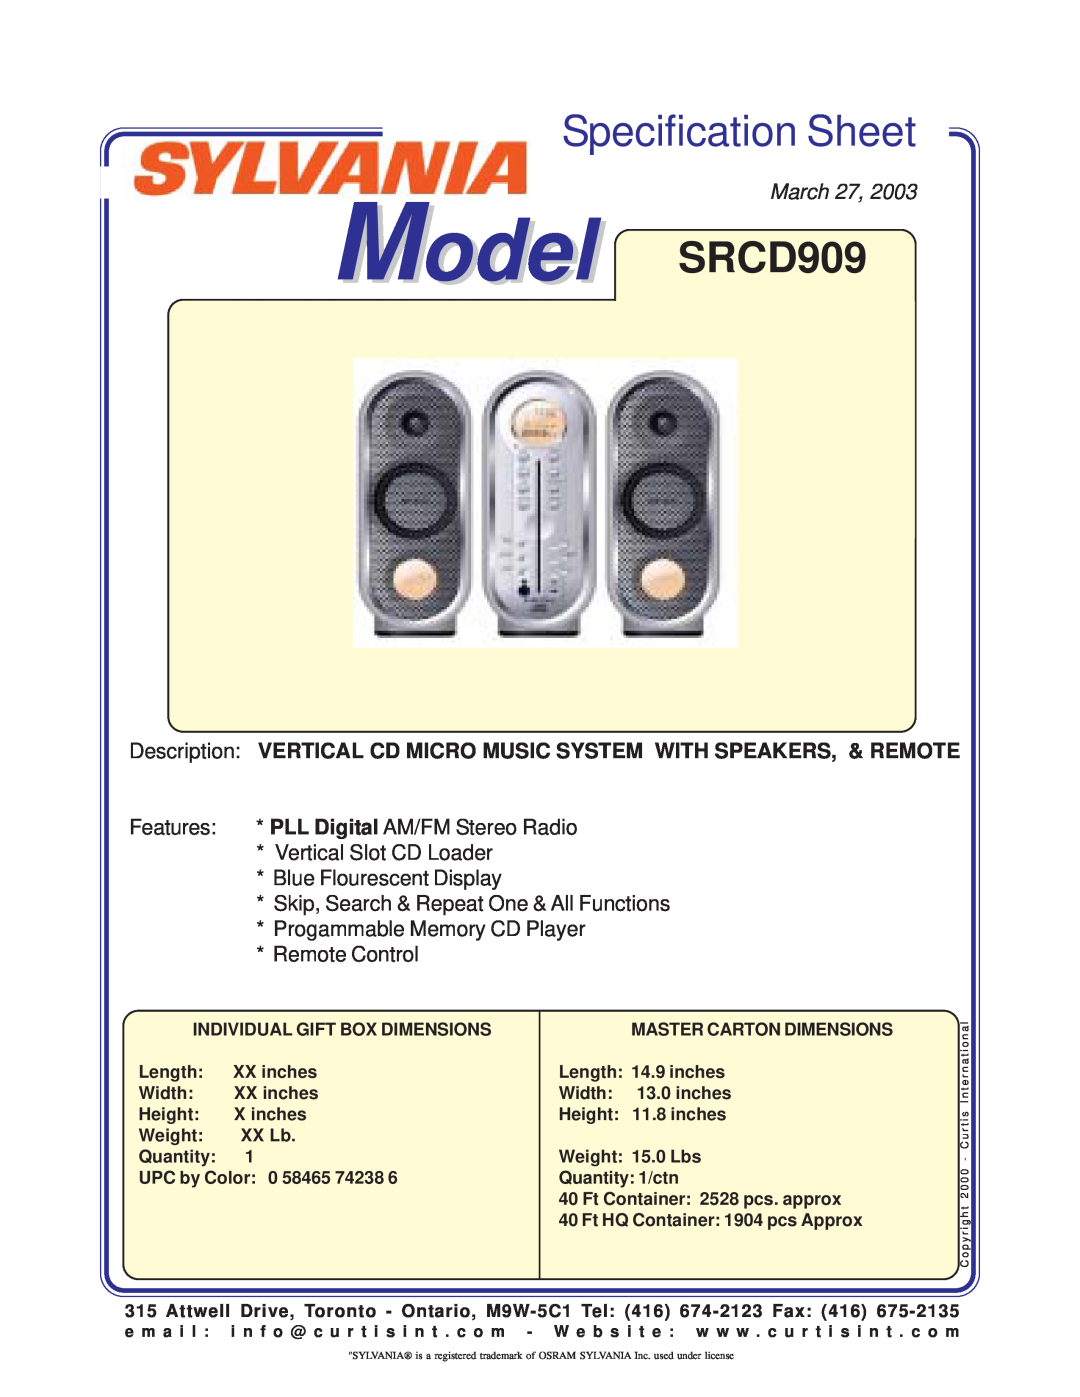 Curtis specifications Specification Sheet, Model SRCD909, March, Place Image Here 